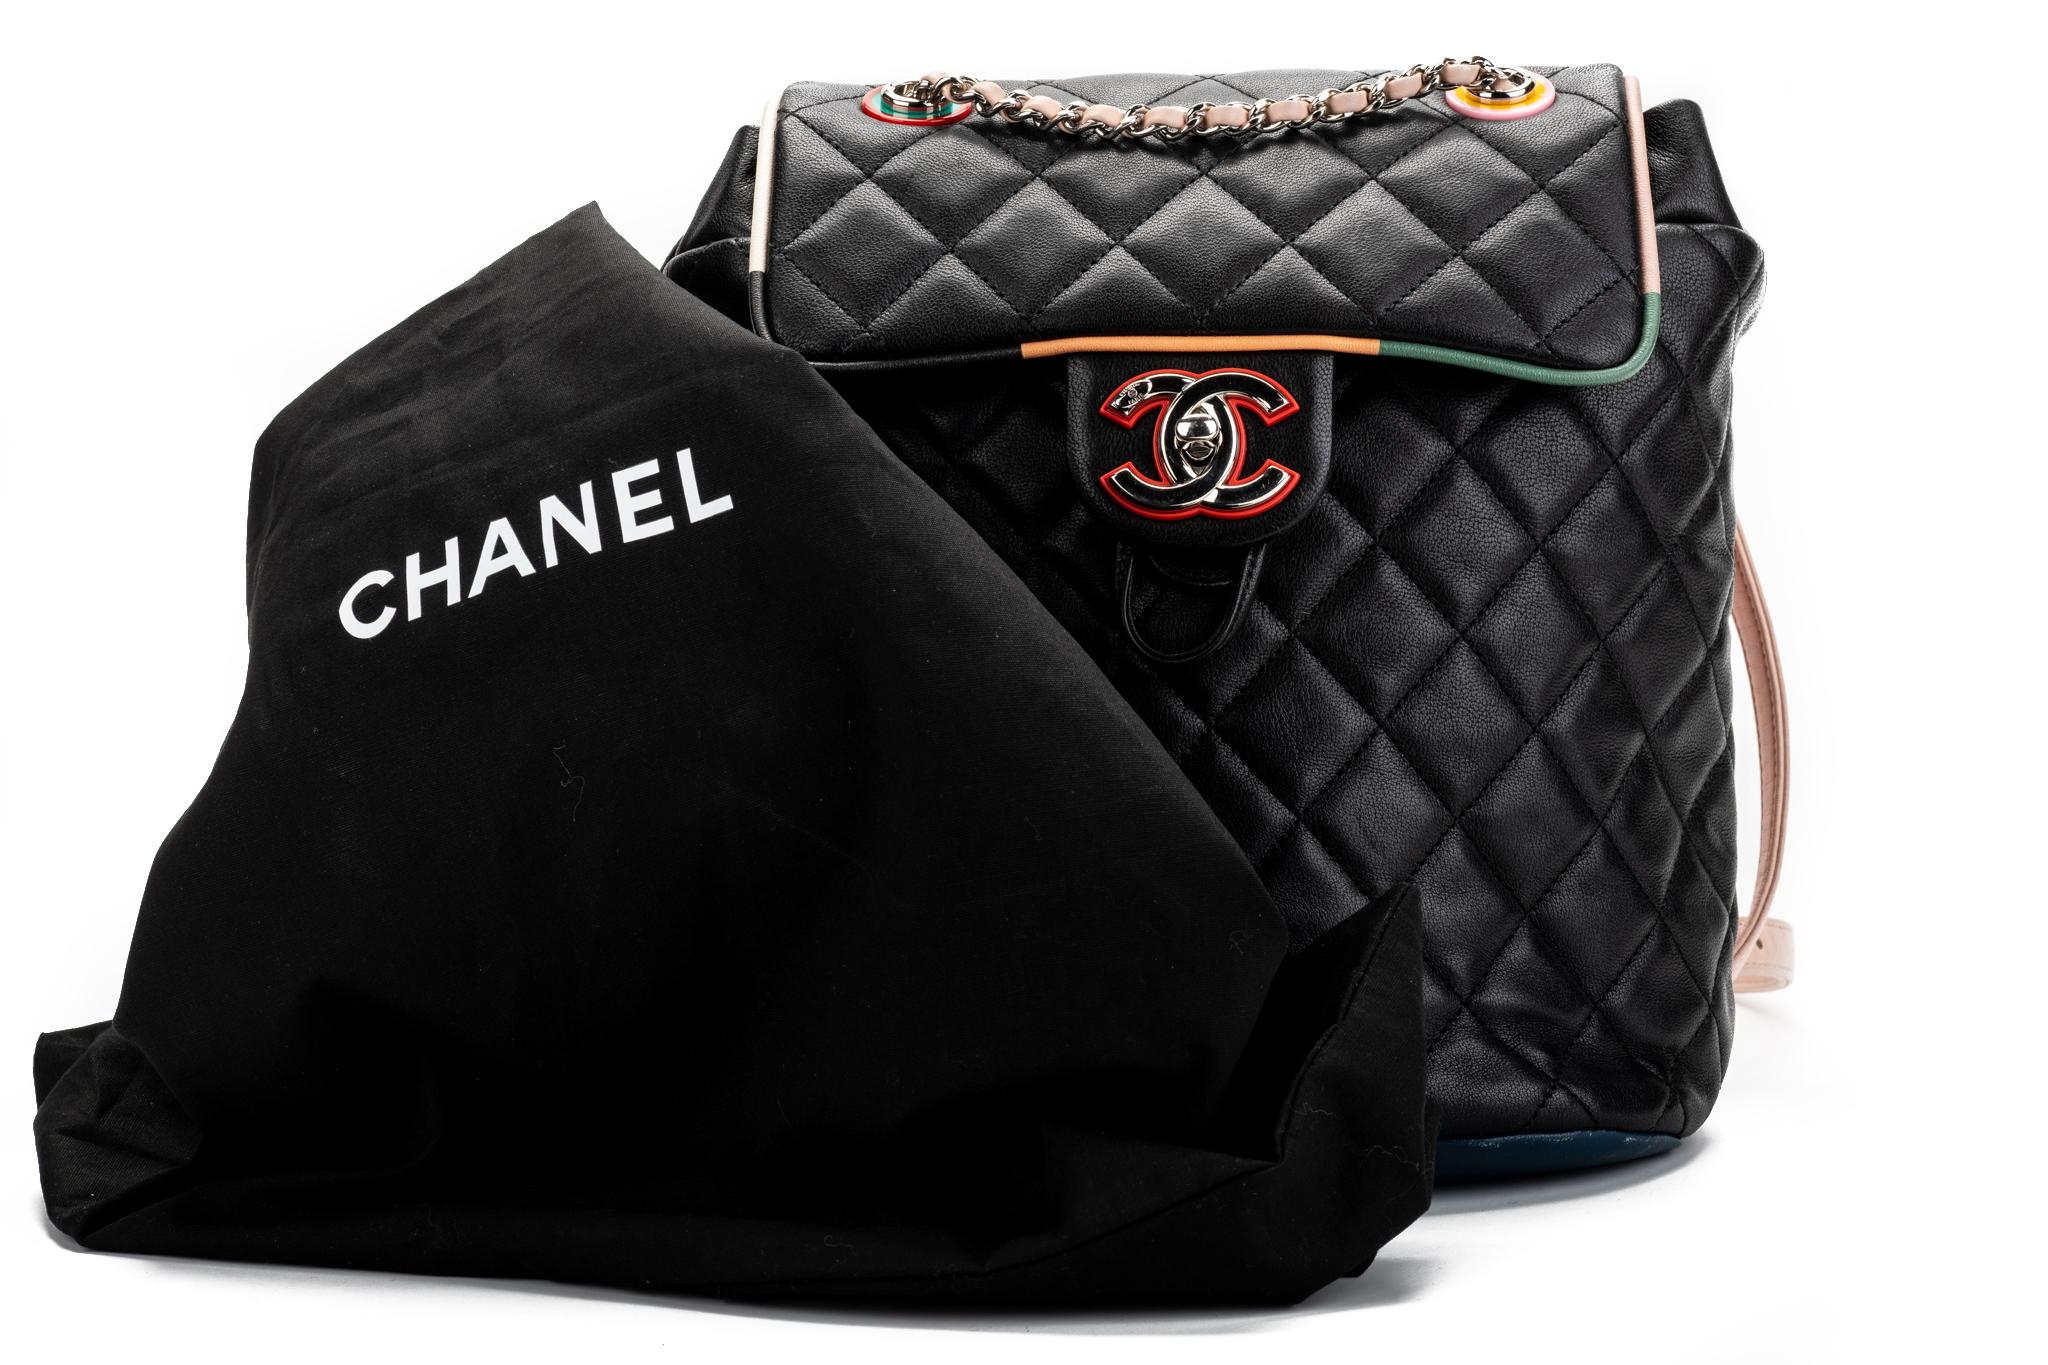 Chanel multicolor lambskin backpack with silver tone hardware. Black, navy, red and pink with colorful trim and grommets. One little mark on the pink back pocket (please refer to photo). Collection 23. Comes with hologram and original dust cover.